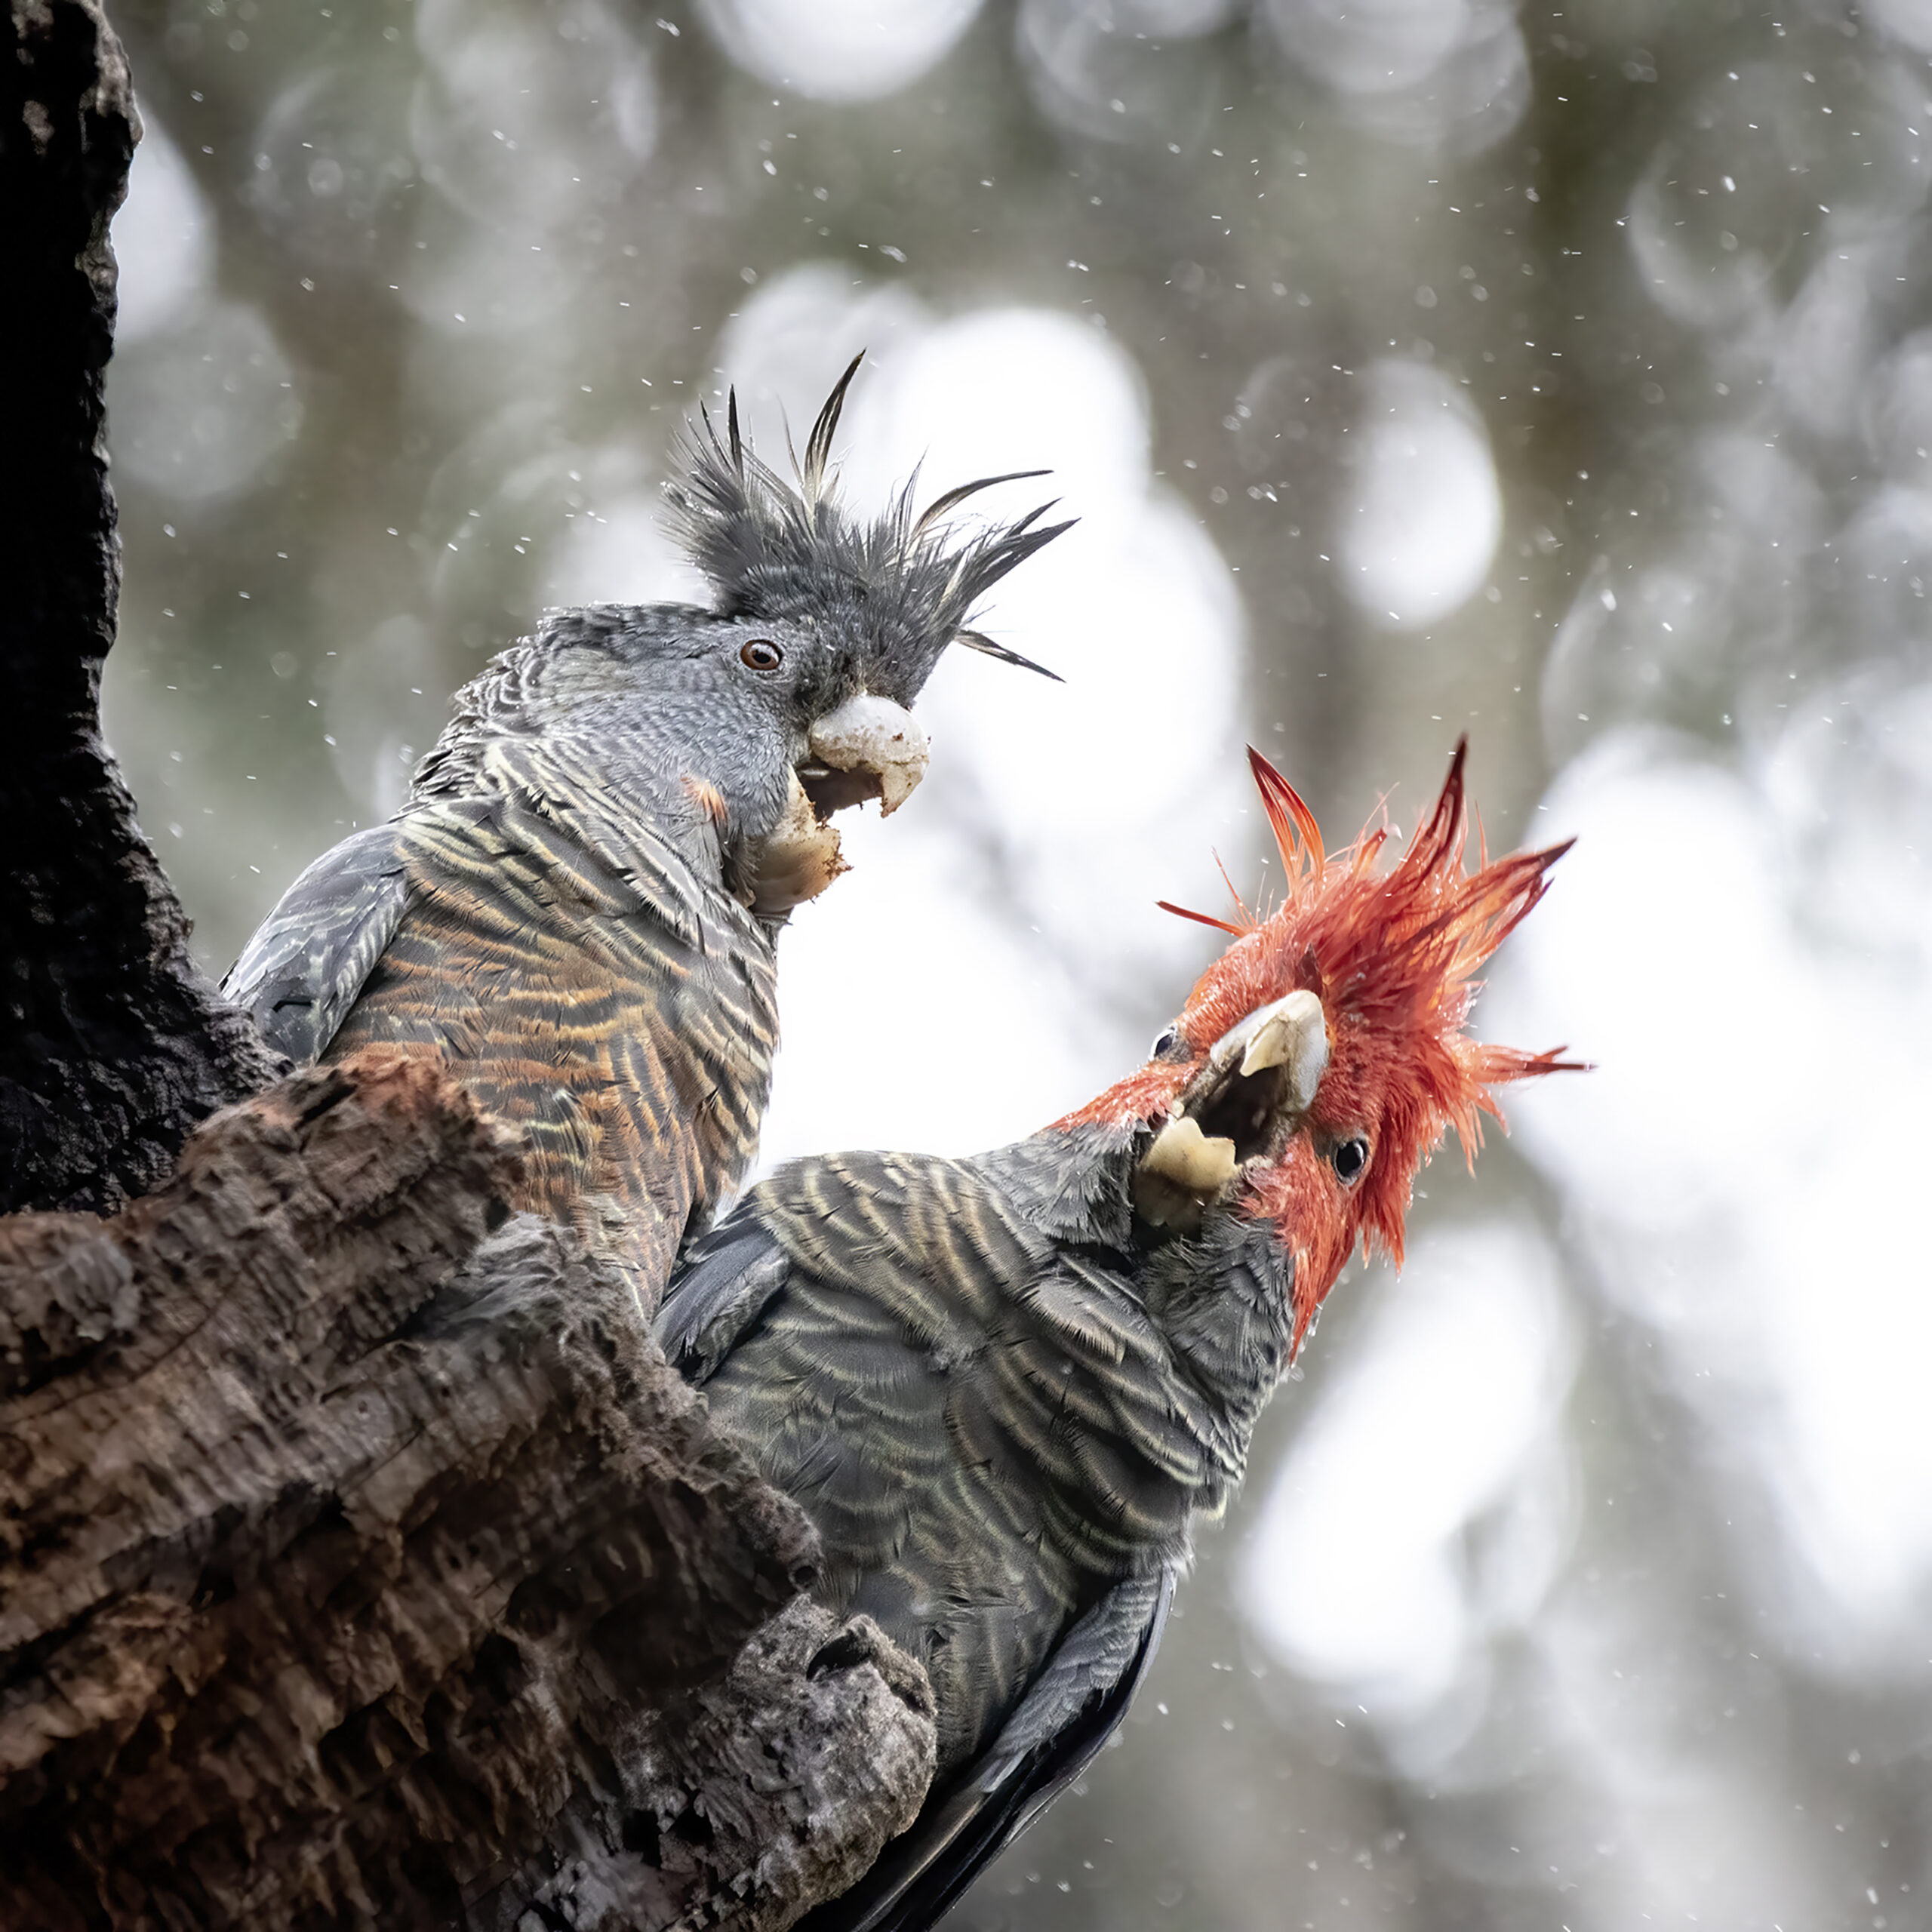 A pair of Gang-gang Cockatoos calling with beaks open and crests extended. They are perched in a tree against a grey and white dappled background, and the male (right) has a red head and crest.